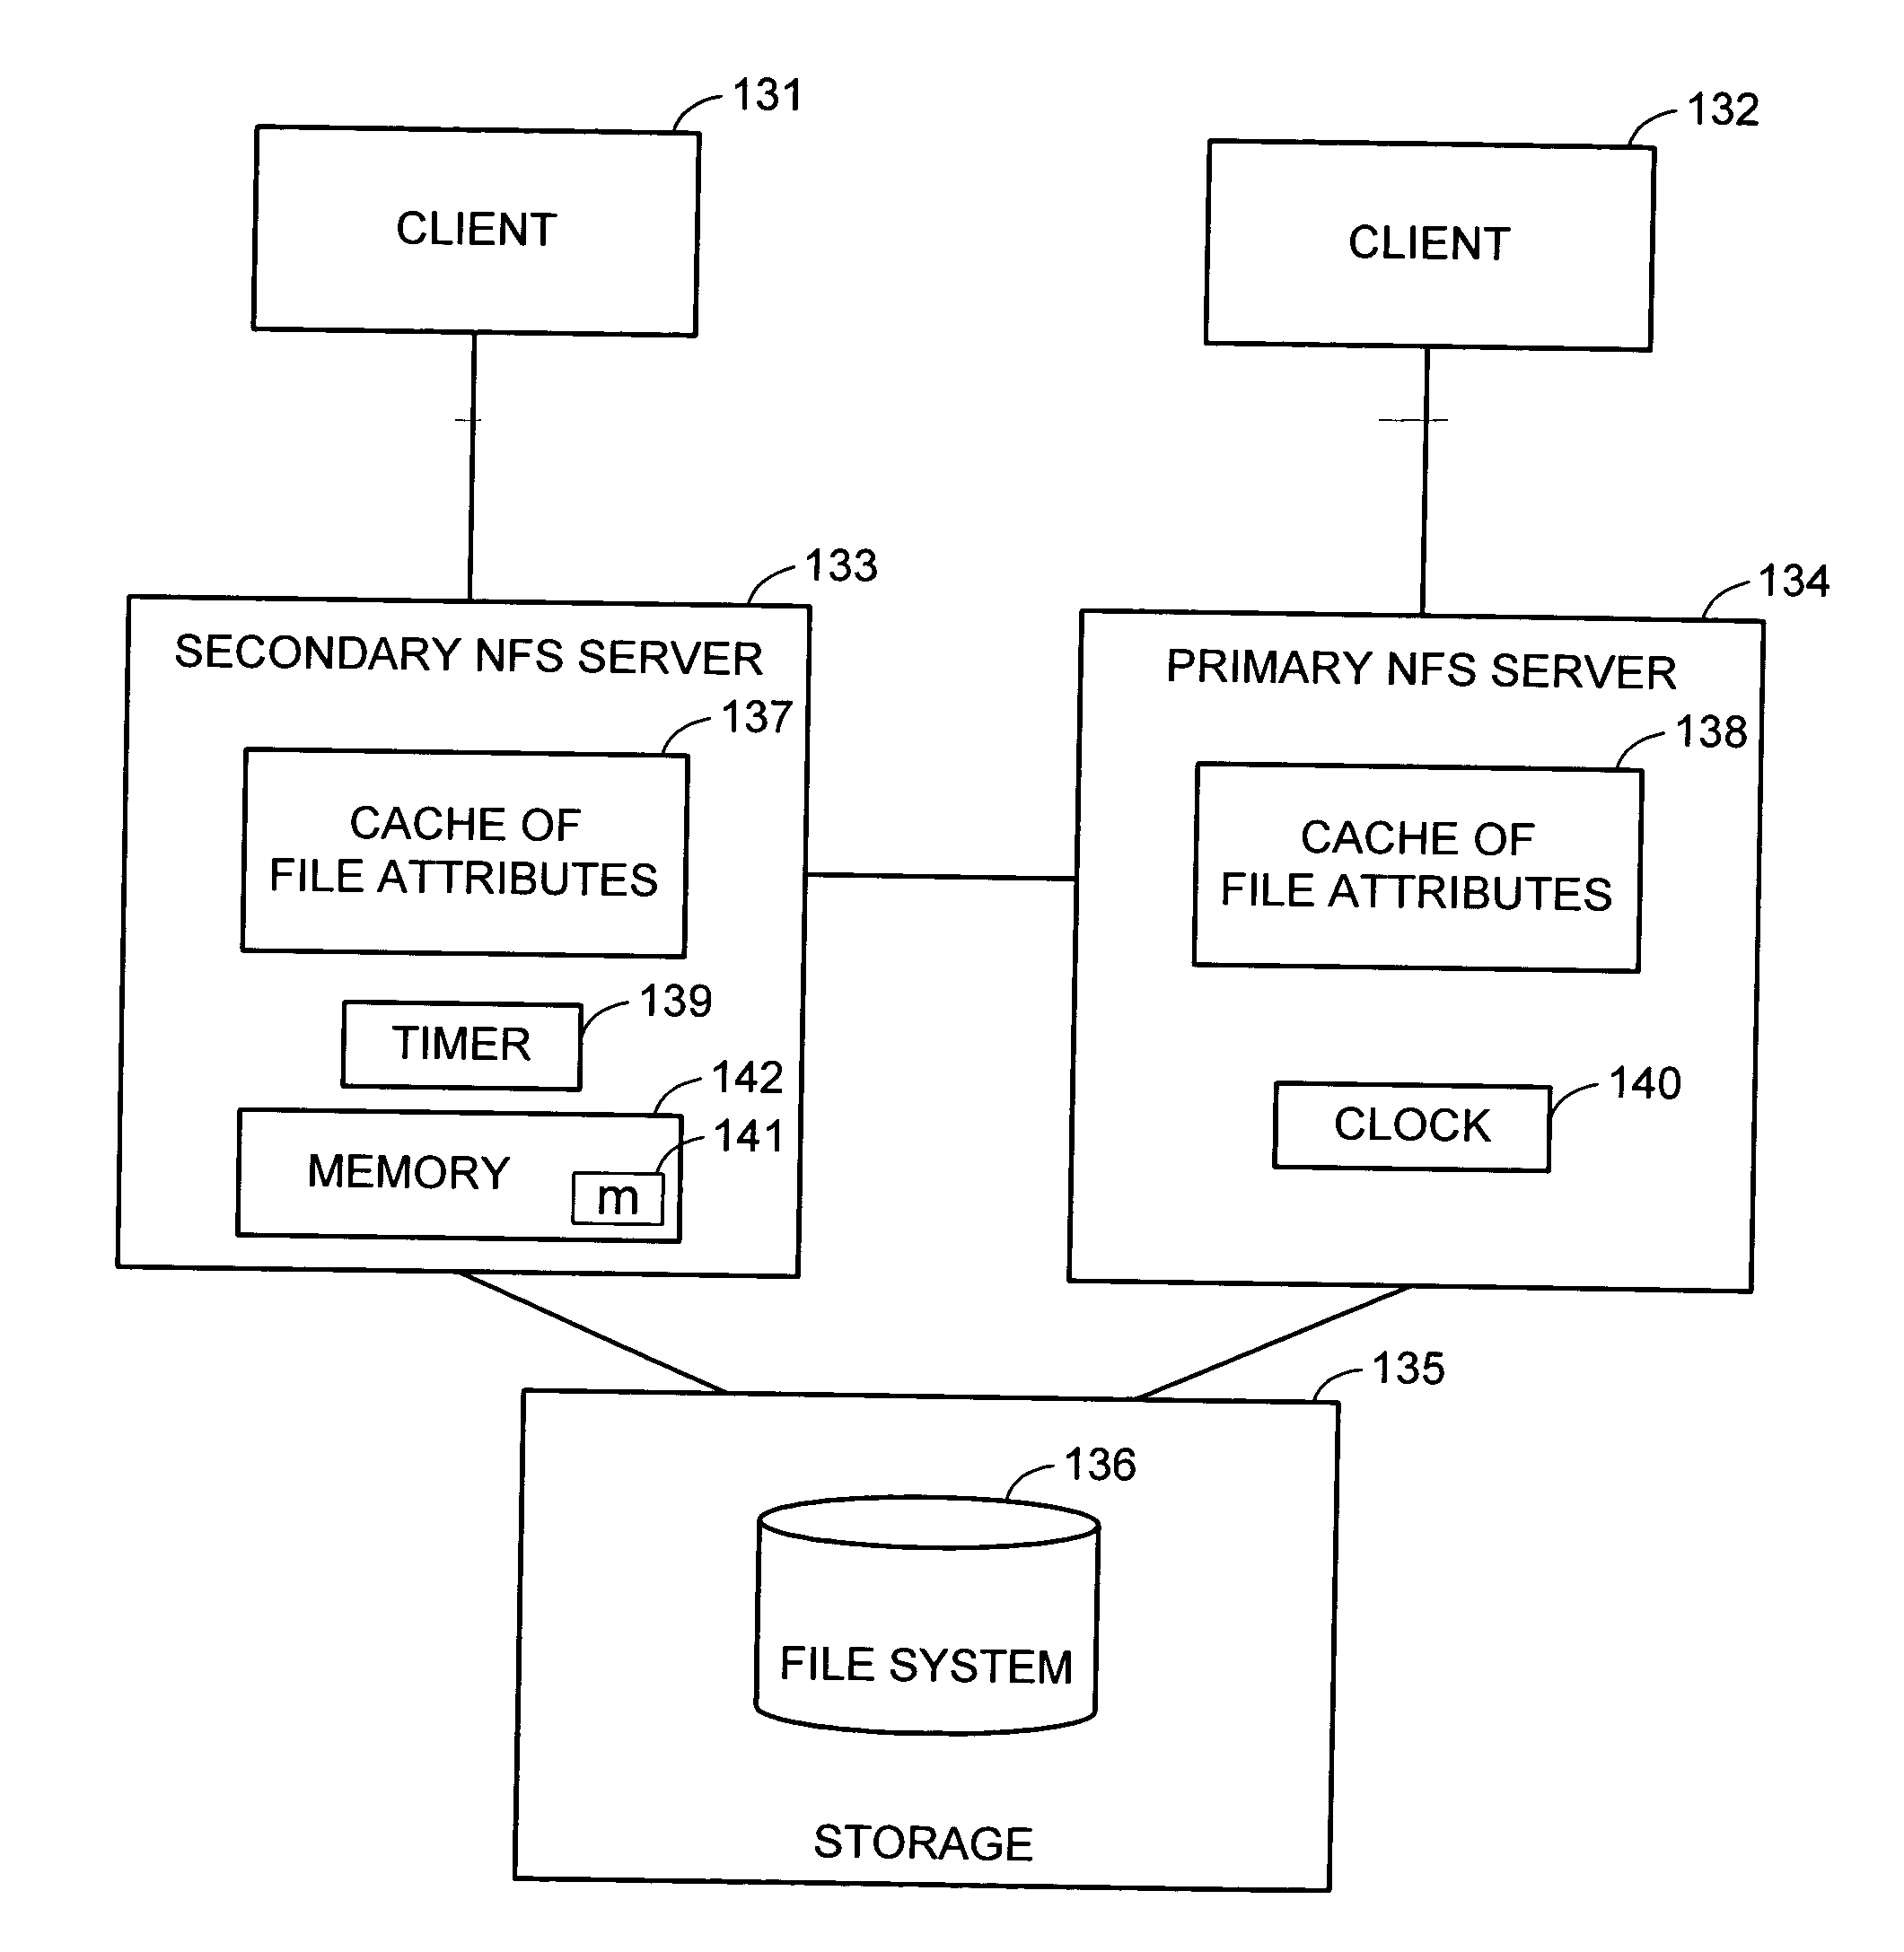 Management of the file-modification time attribute in a multi-processor file server system